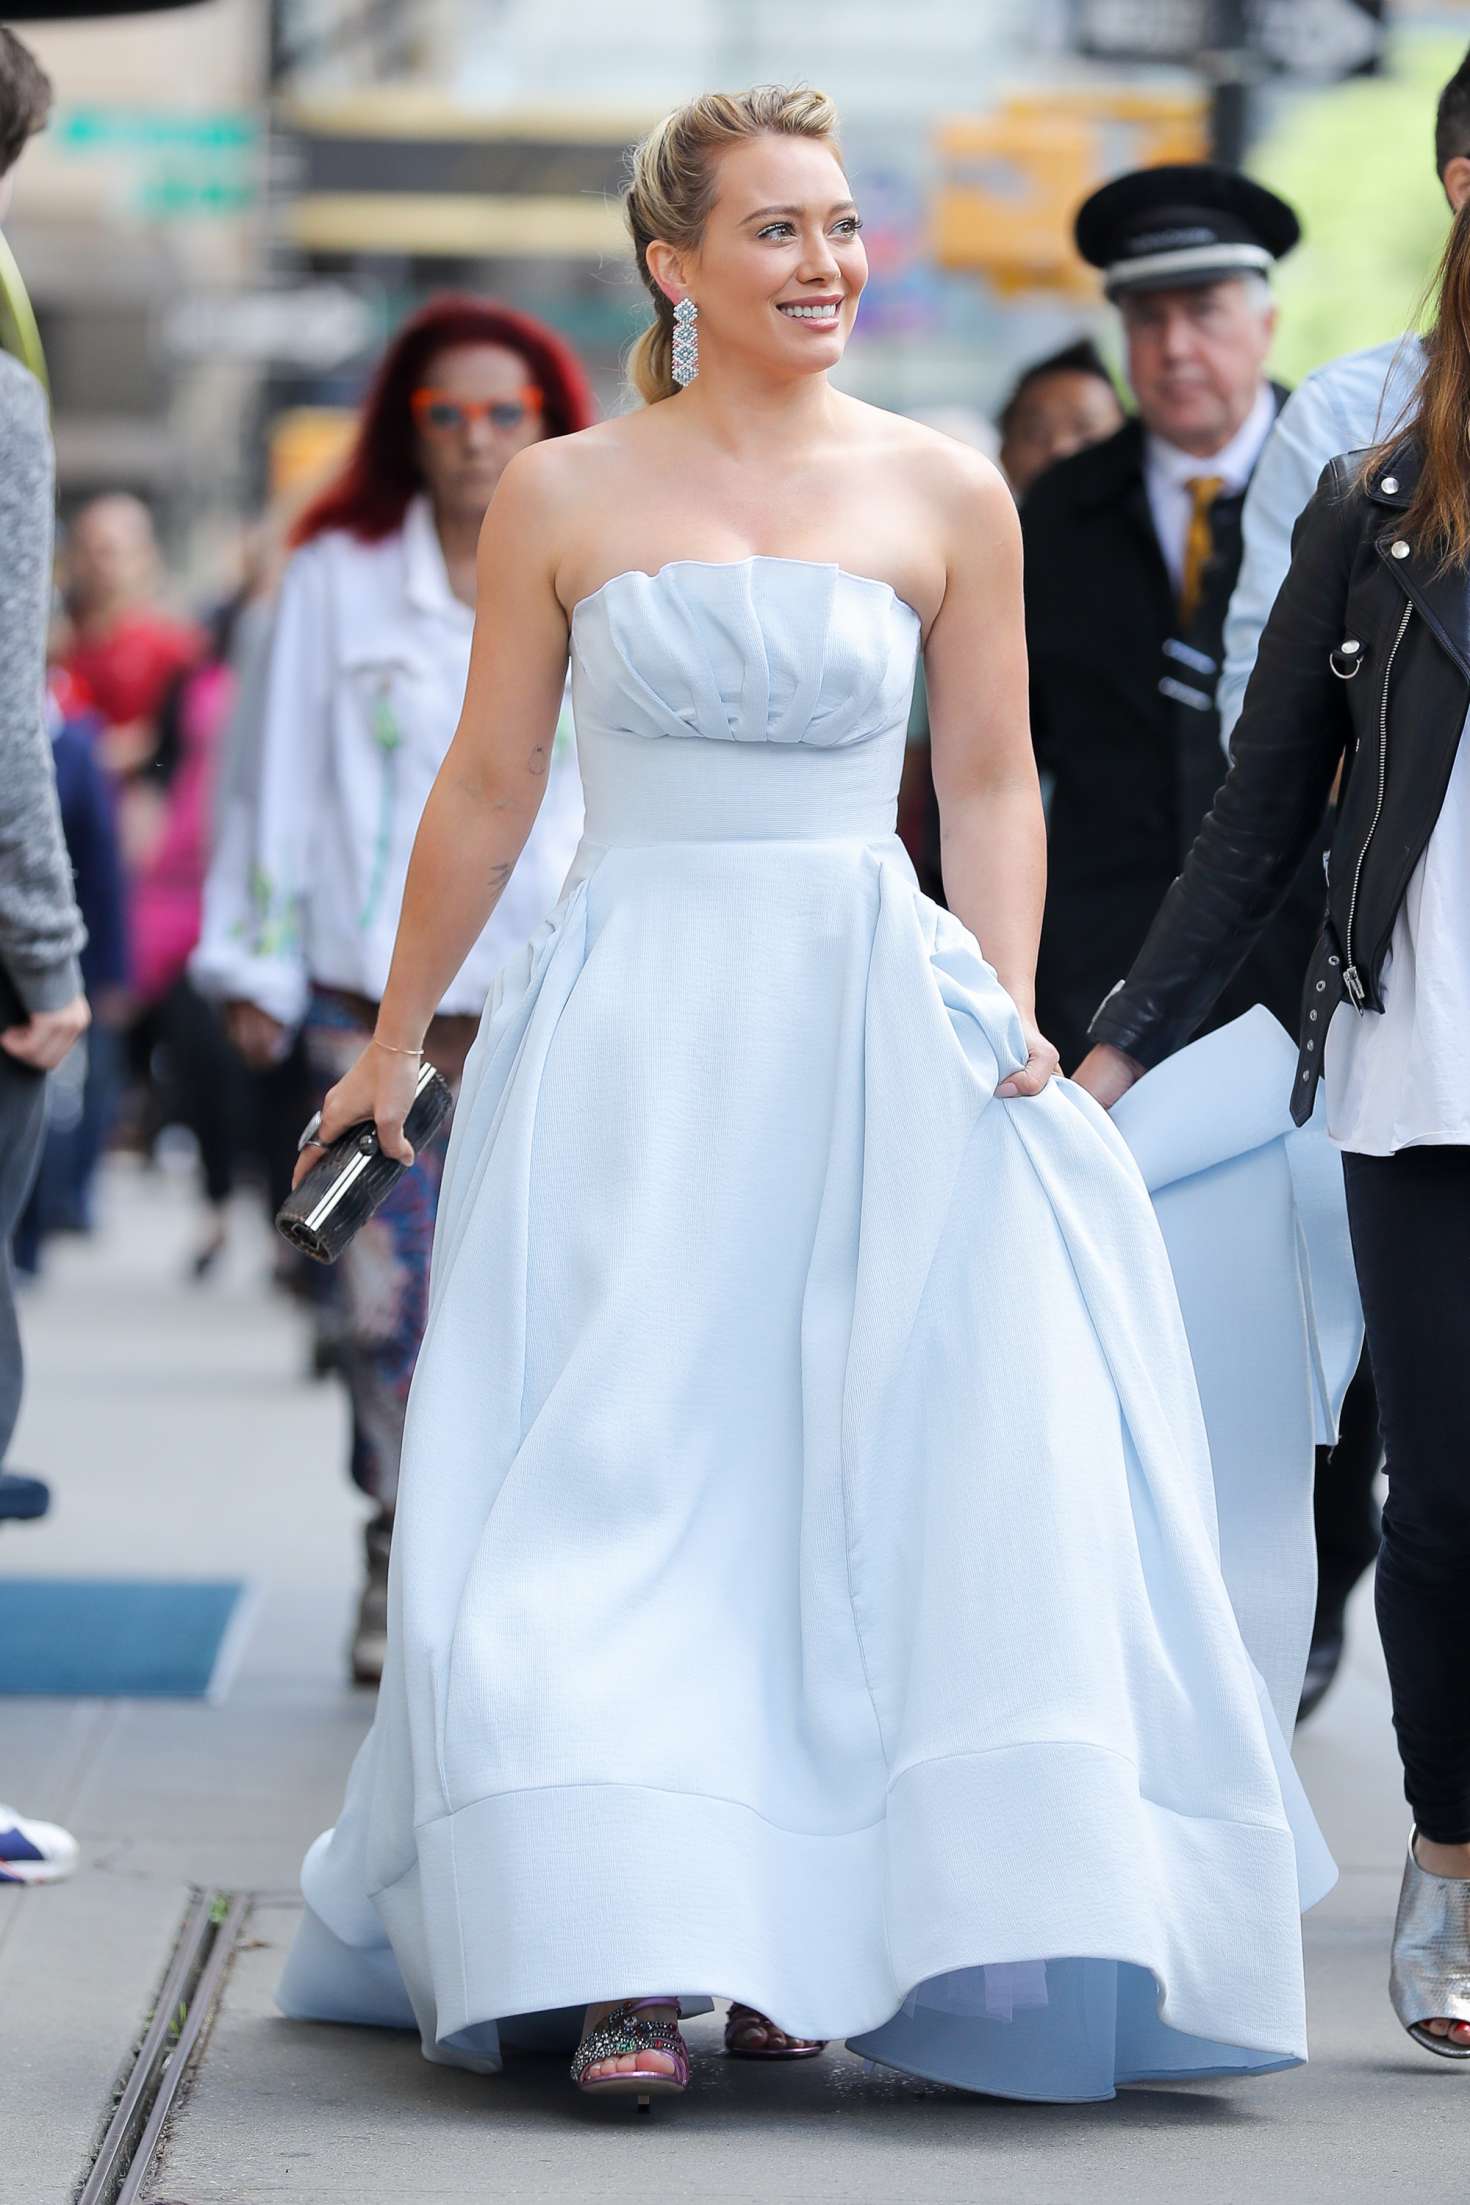 Hilary Duff in a 'Cinderella' dress at the 'Younger' se...